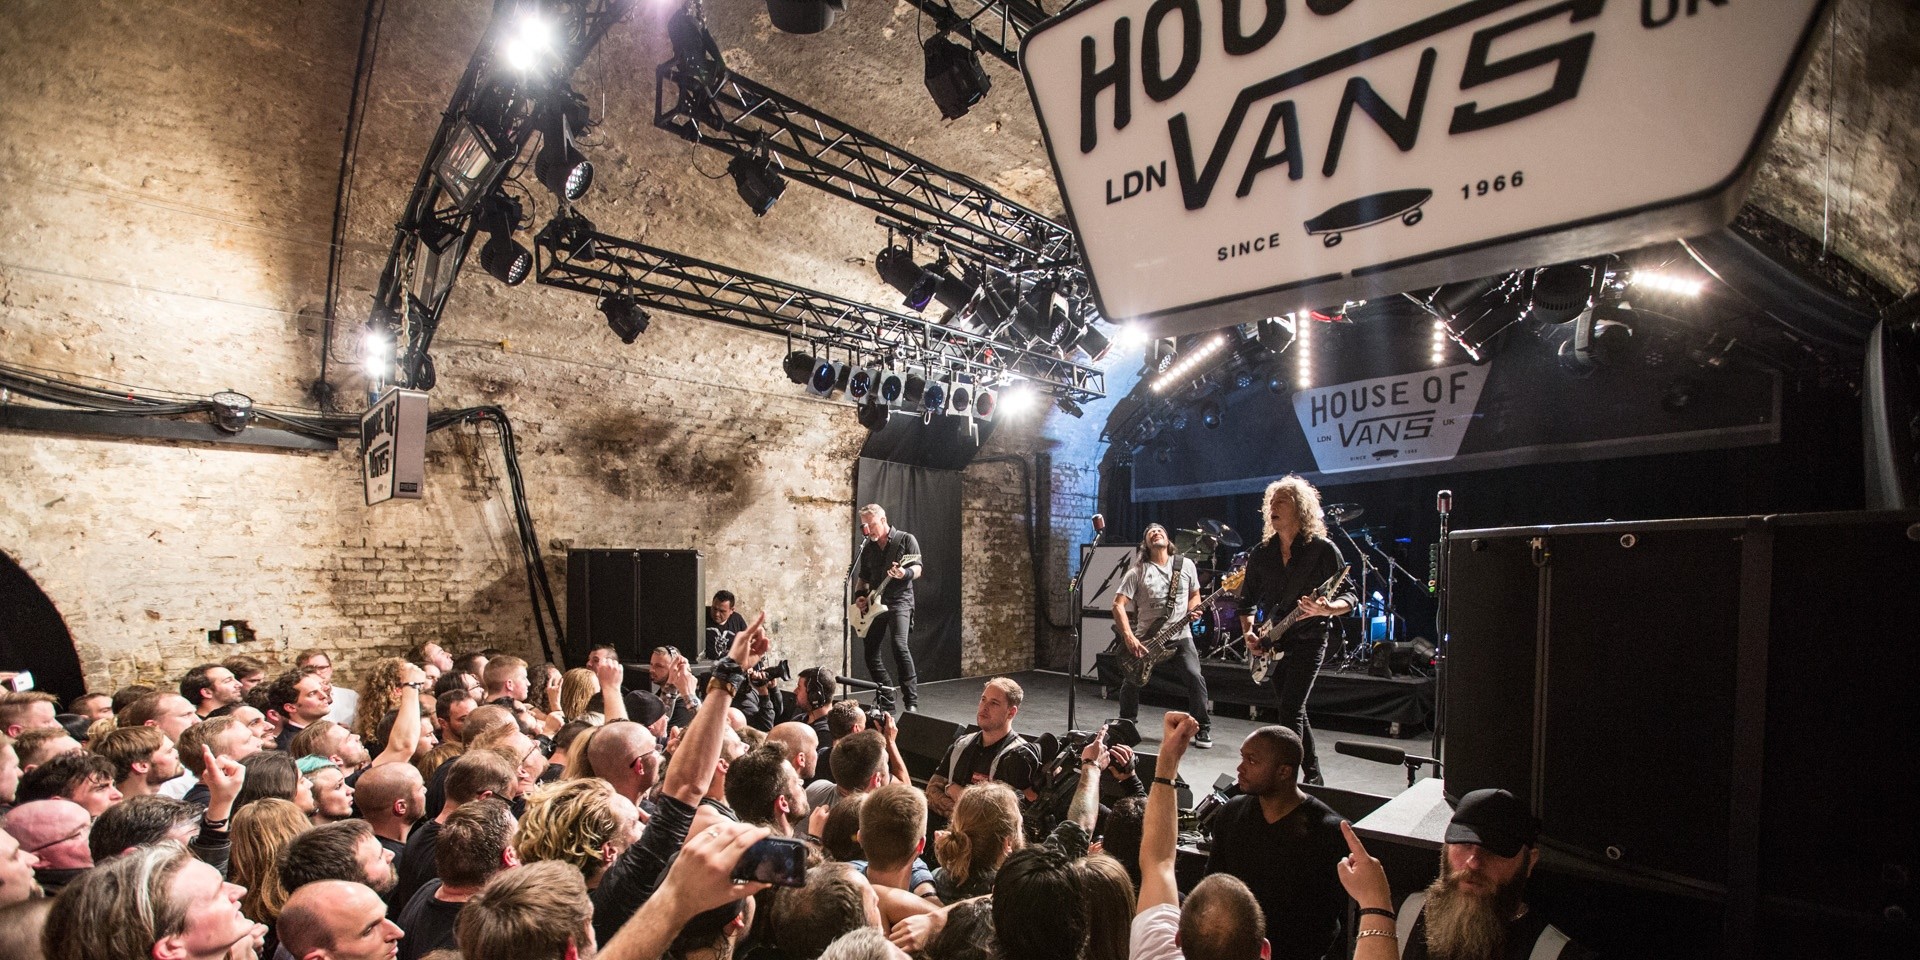 Vans Musicians Wanted, and the brand's relationship with music explained